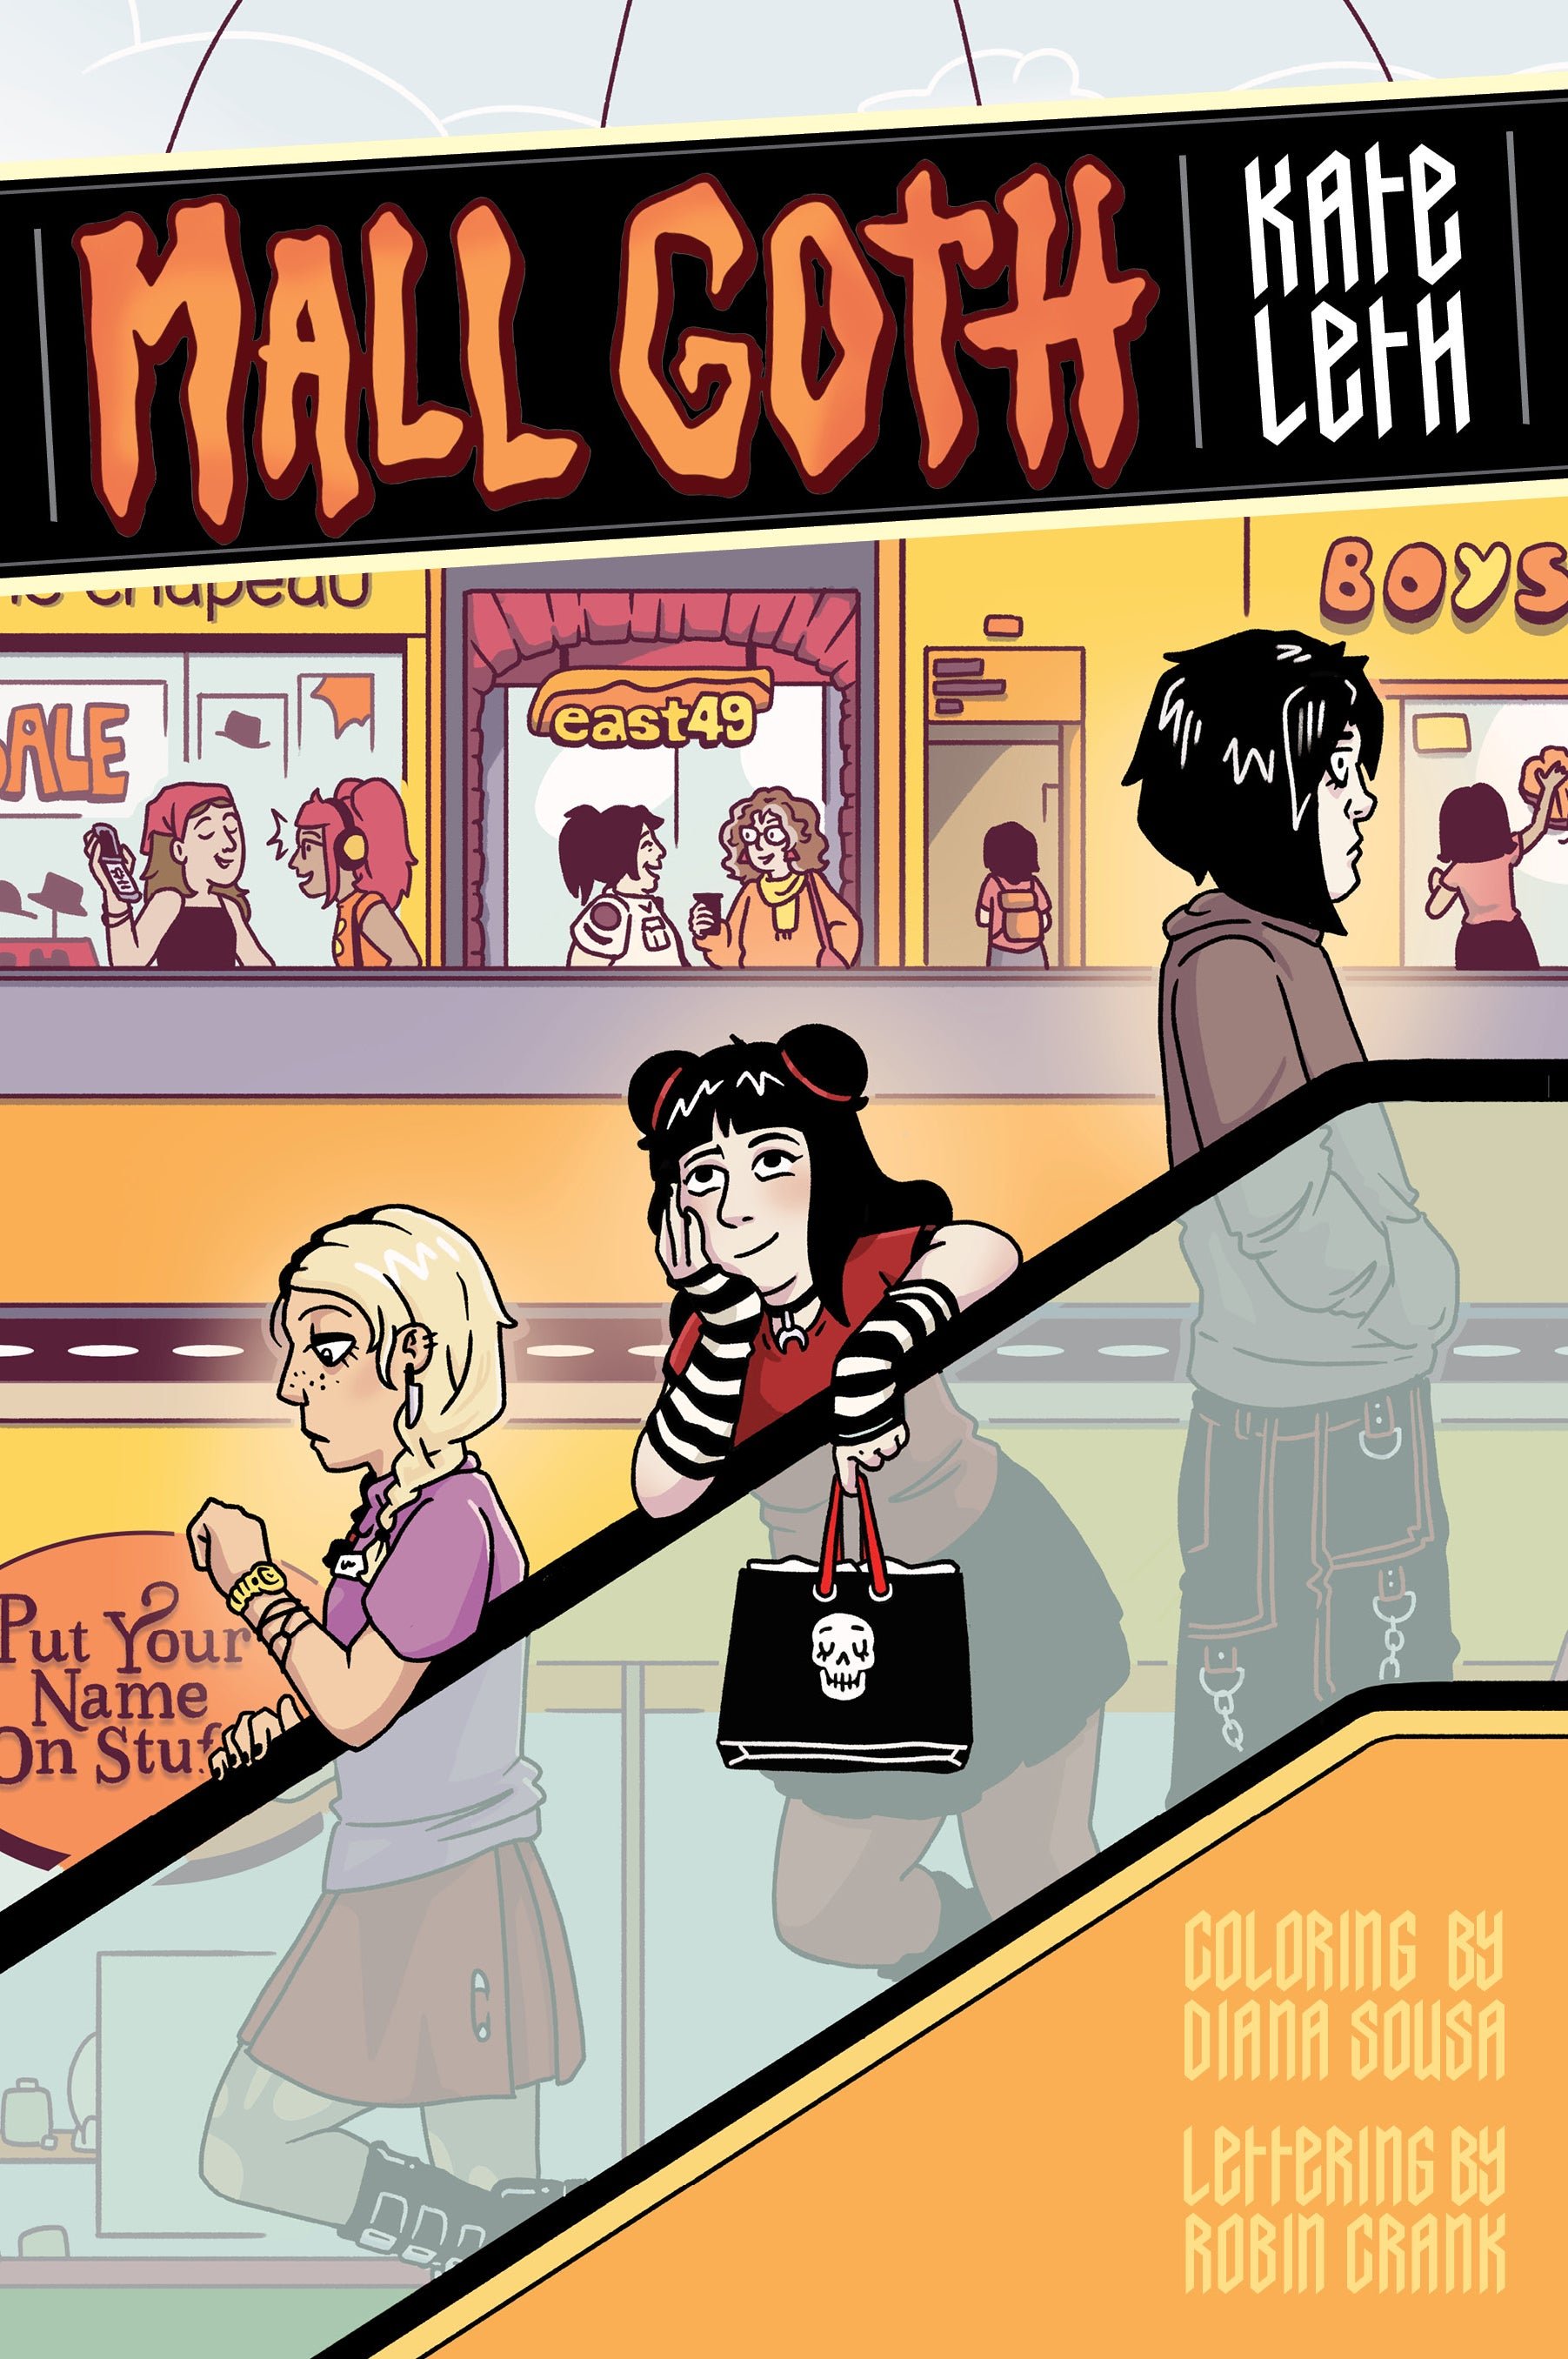 Cover of Mall Goth by Kate Leth